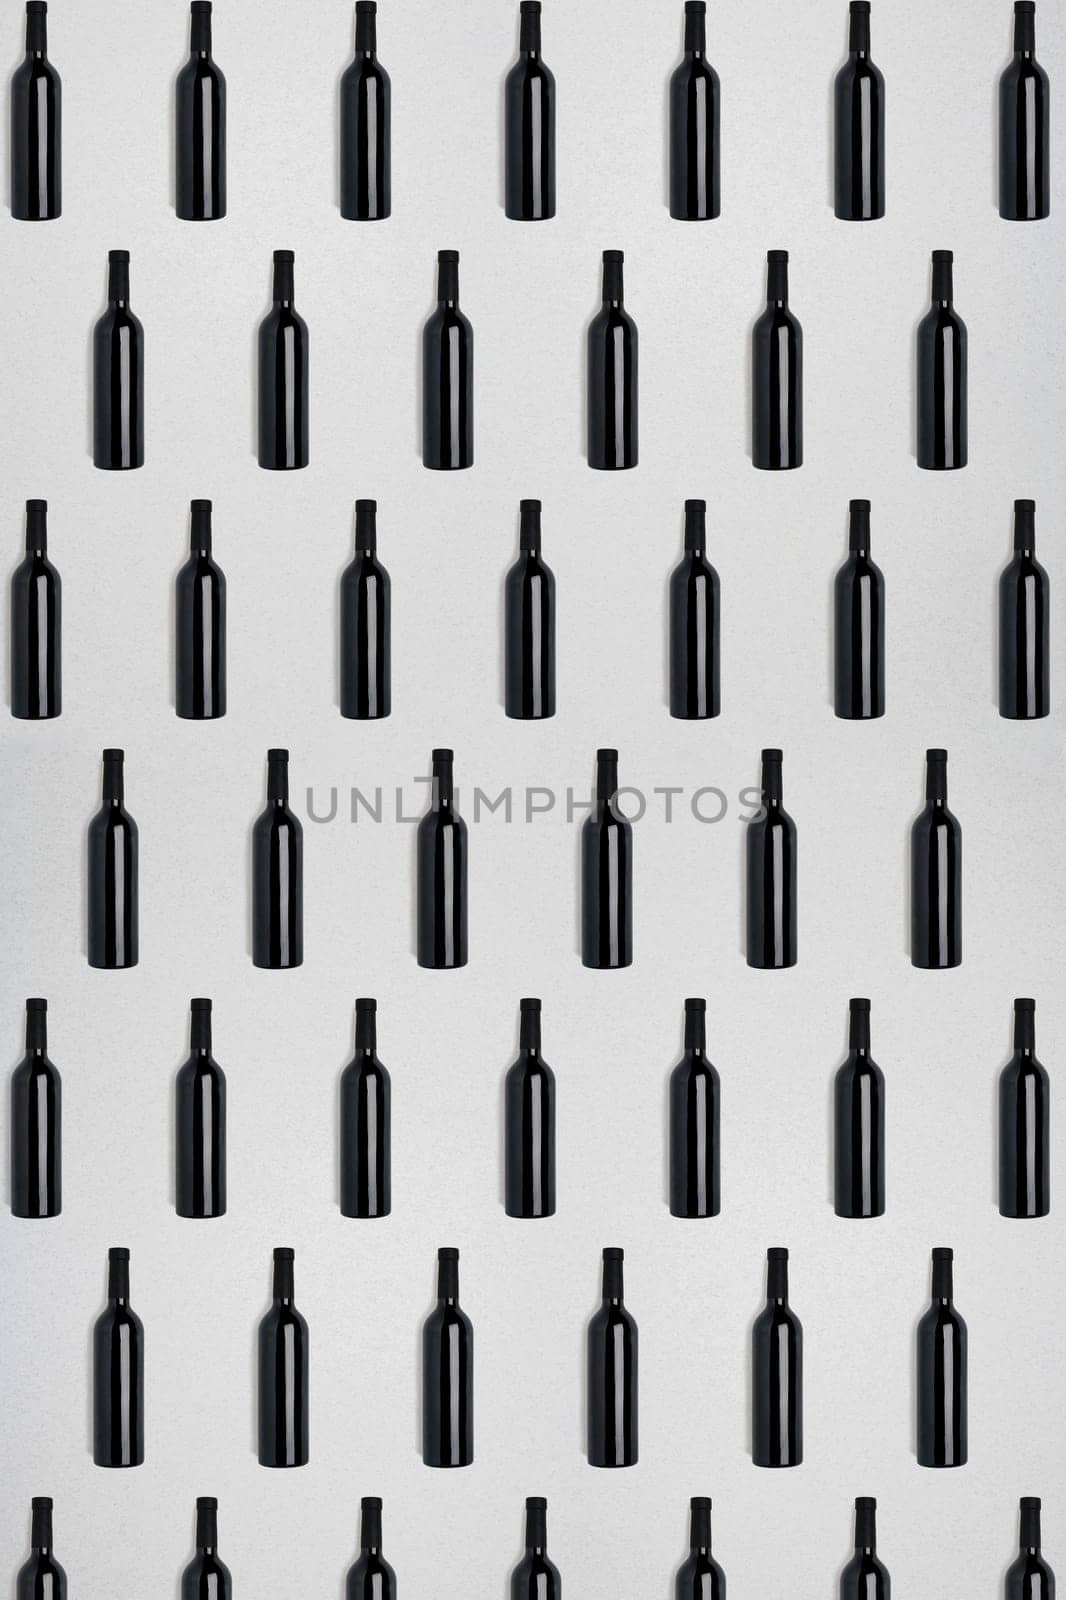 Dark wine bottles. Creative dark and textured abstract background. A lot of bottles of wine on a white background. Pattern